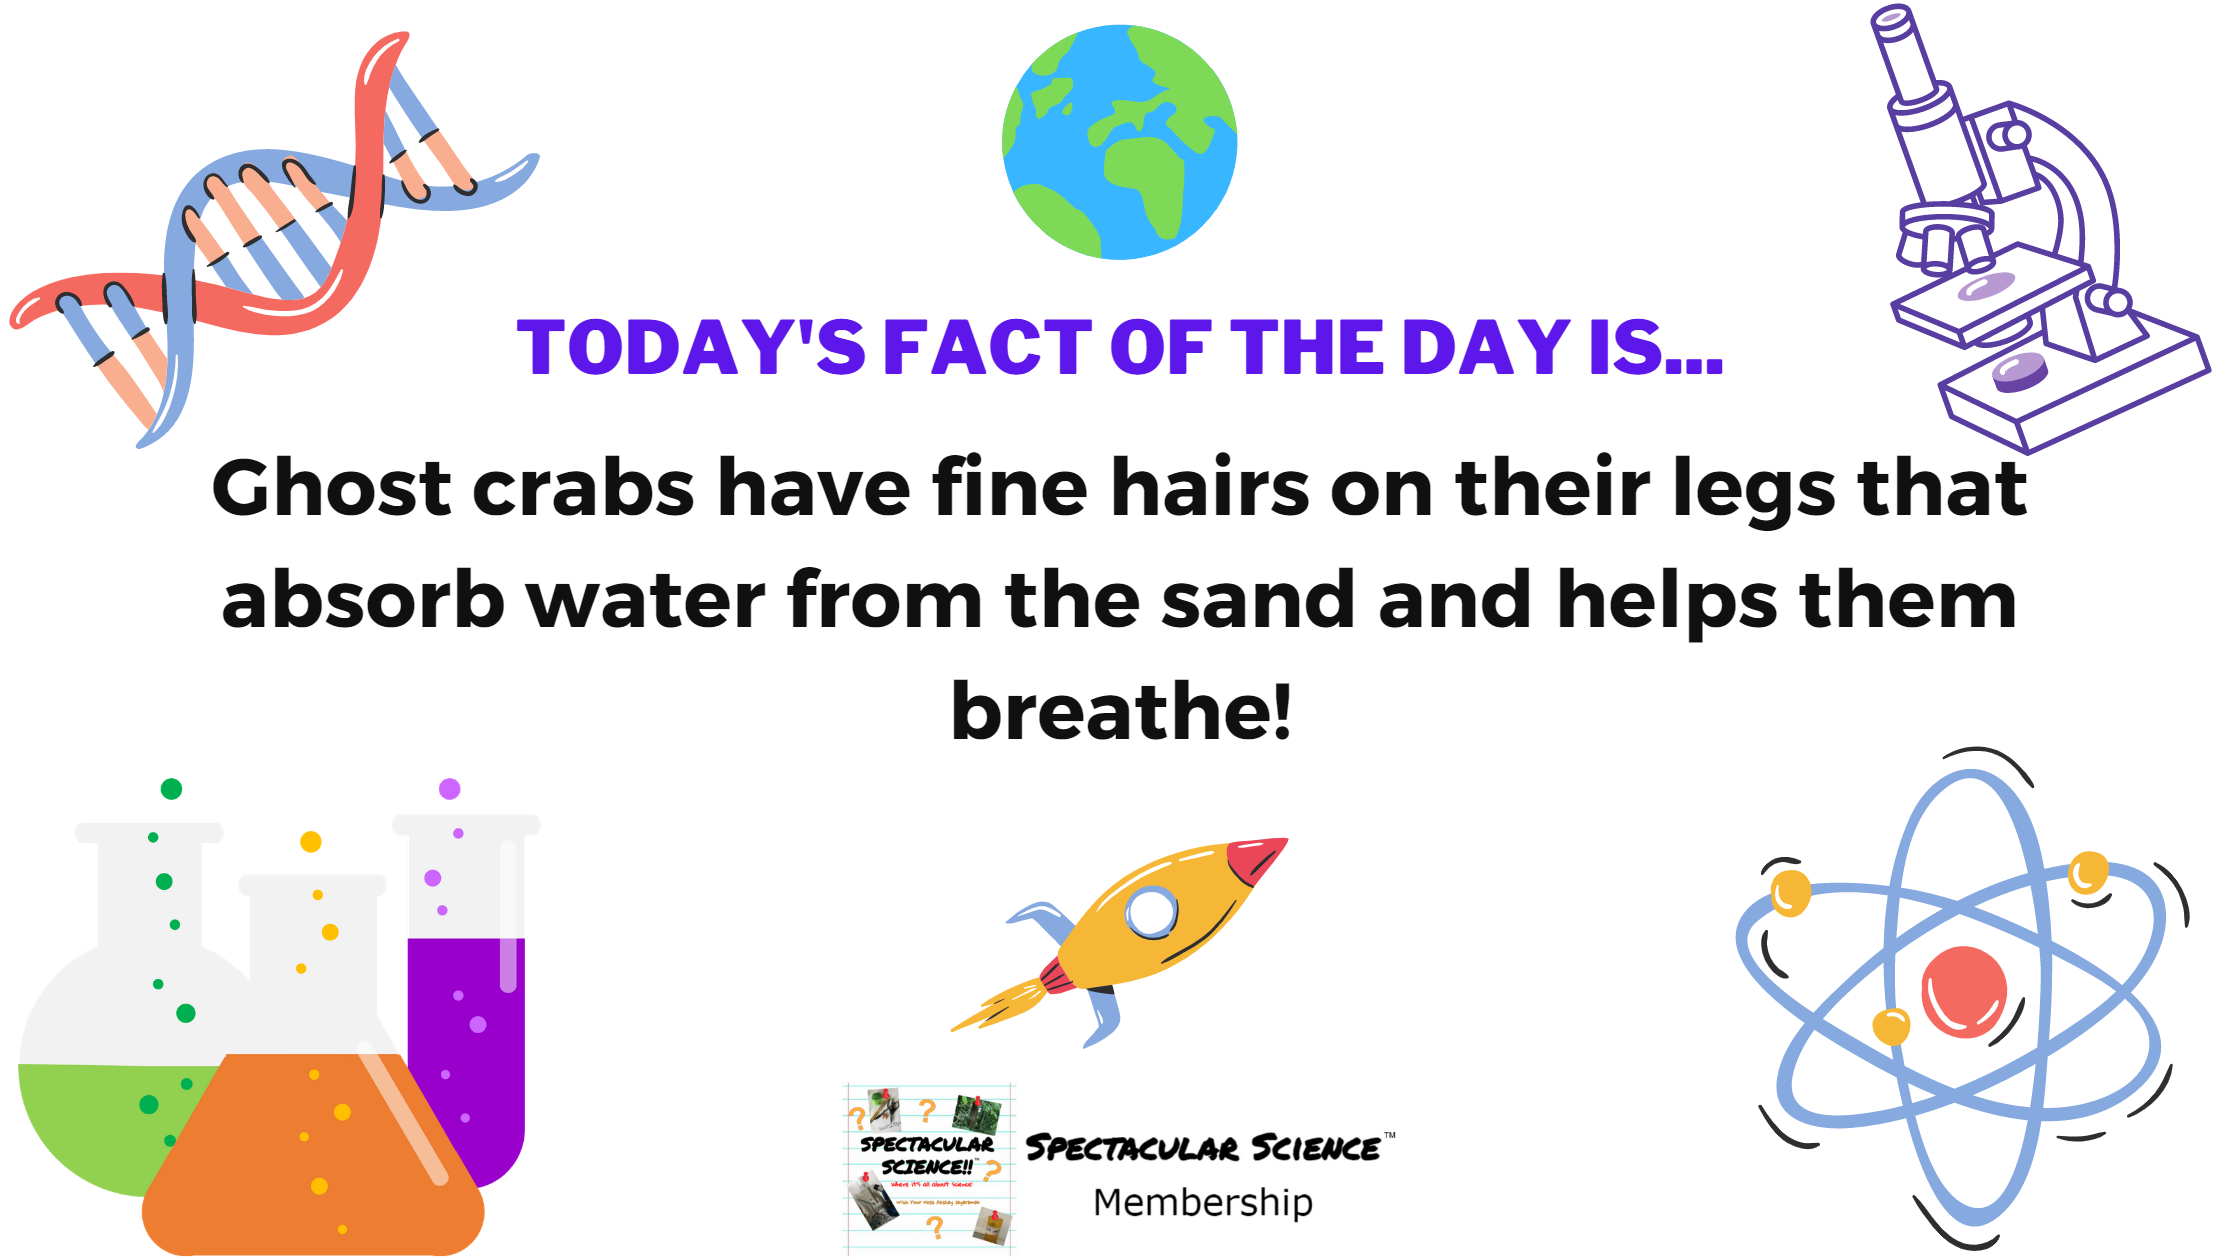 Fact of the Day Image February 1st